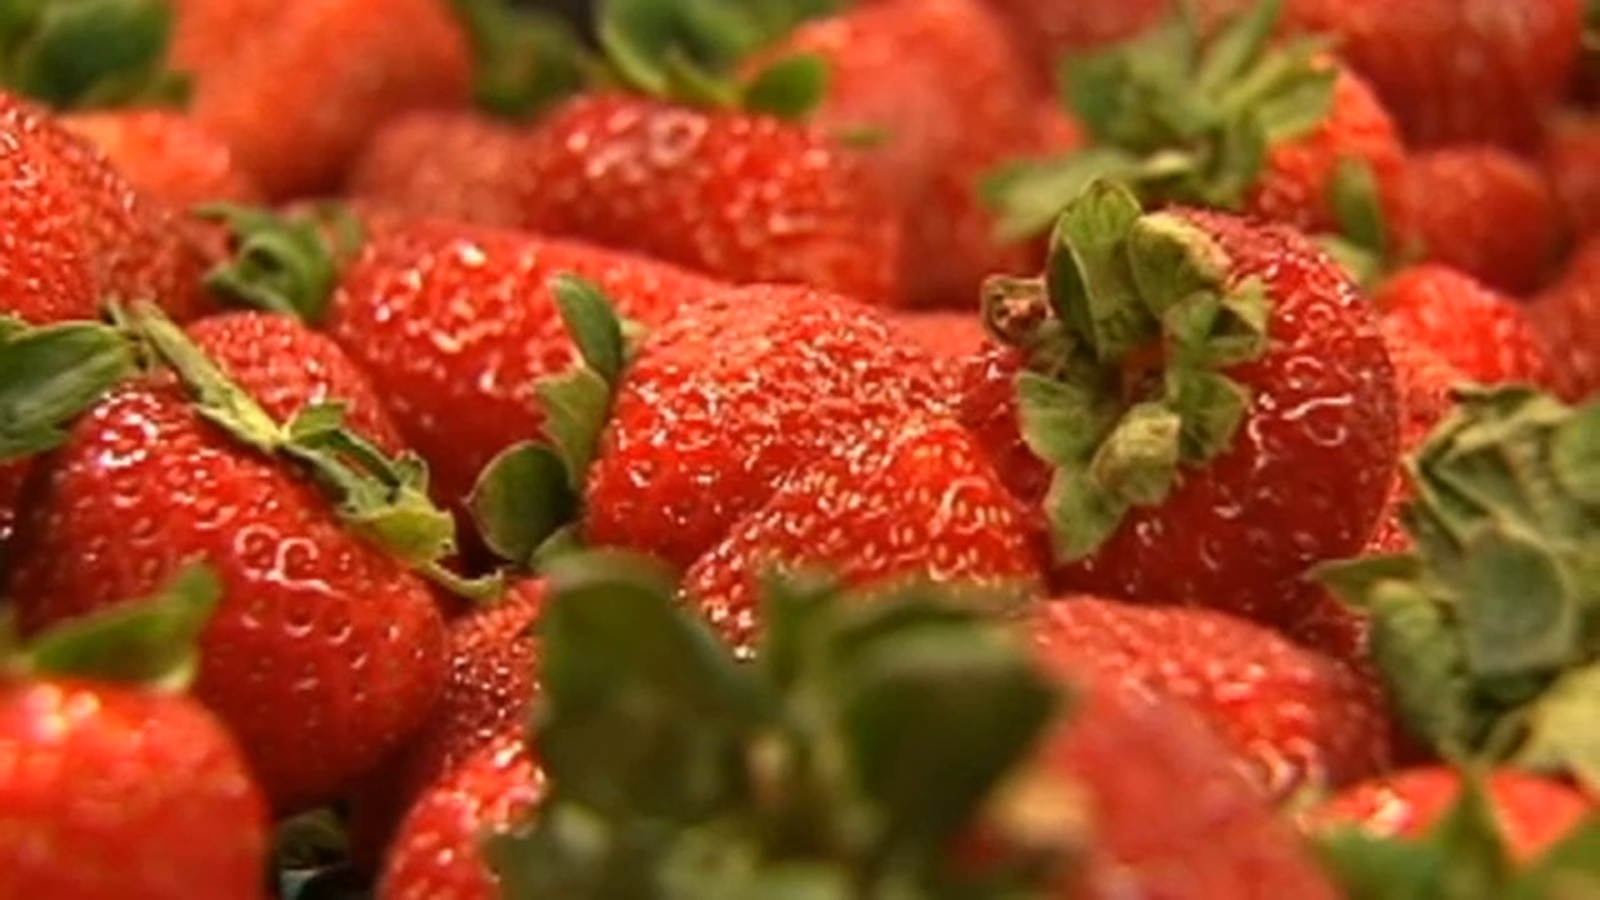 2023 Dirty Dozen and Clean 15 foods released: Strawberries top the list of fruits and vegetables with the most pesticides